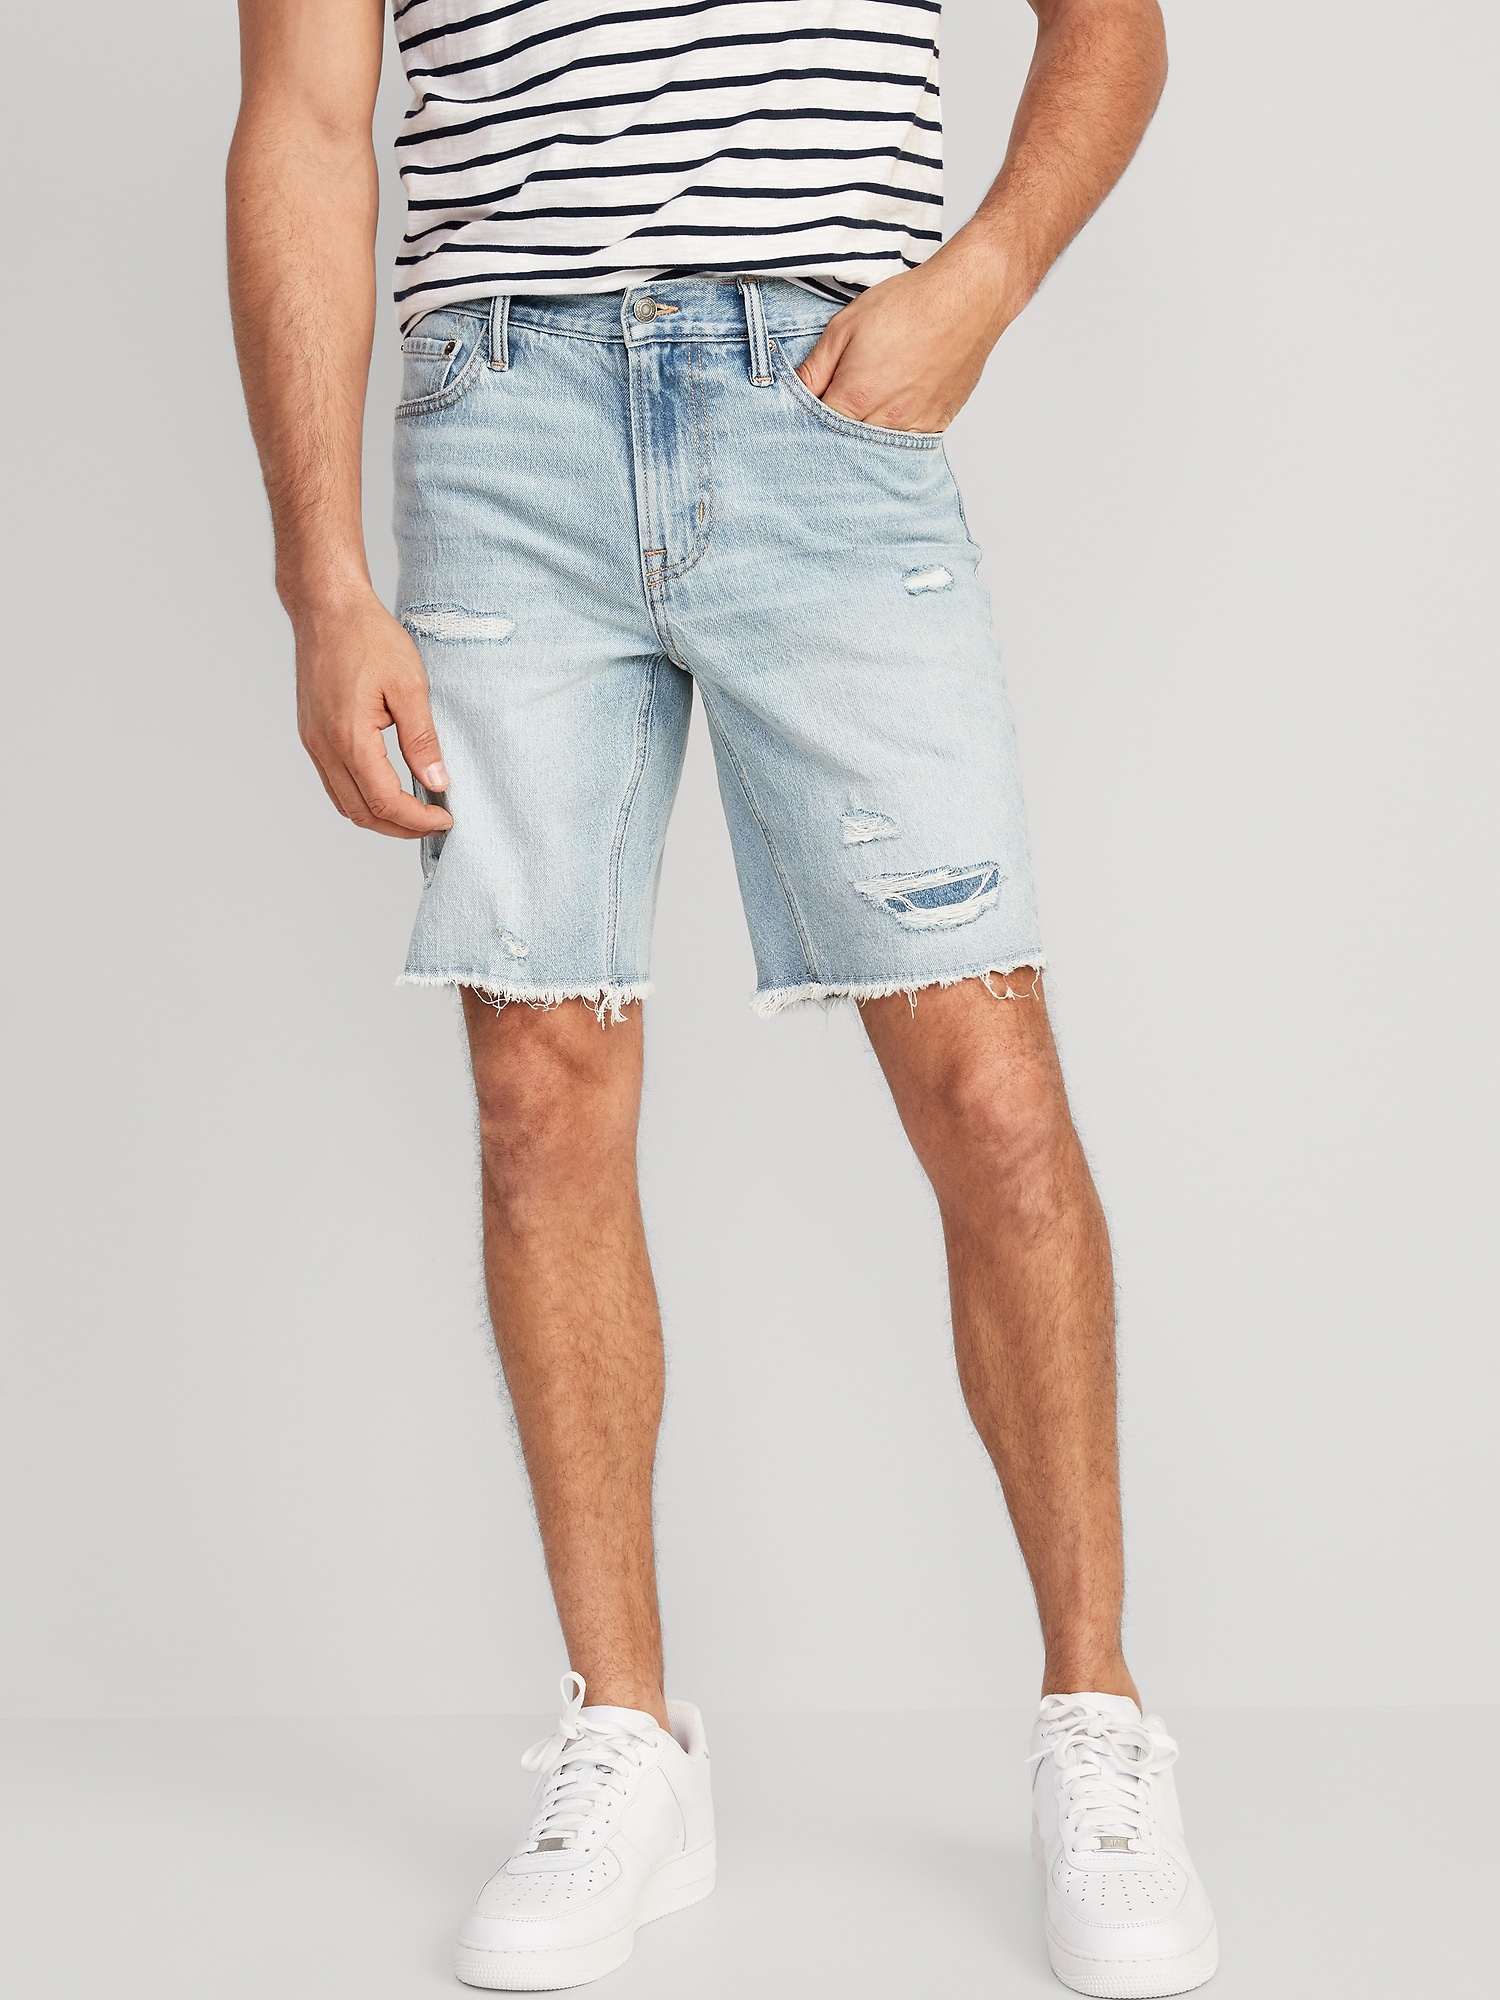 Lucky Brand 9in Denim Cut-off Shorts - Alternate Route Outfitters